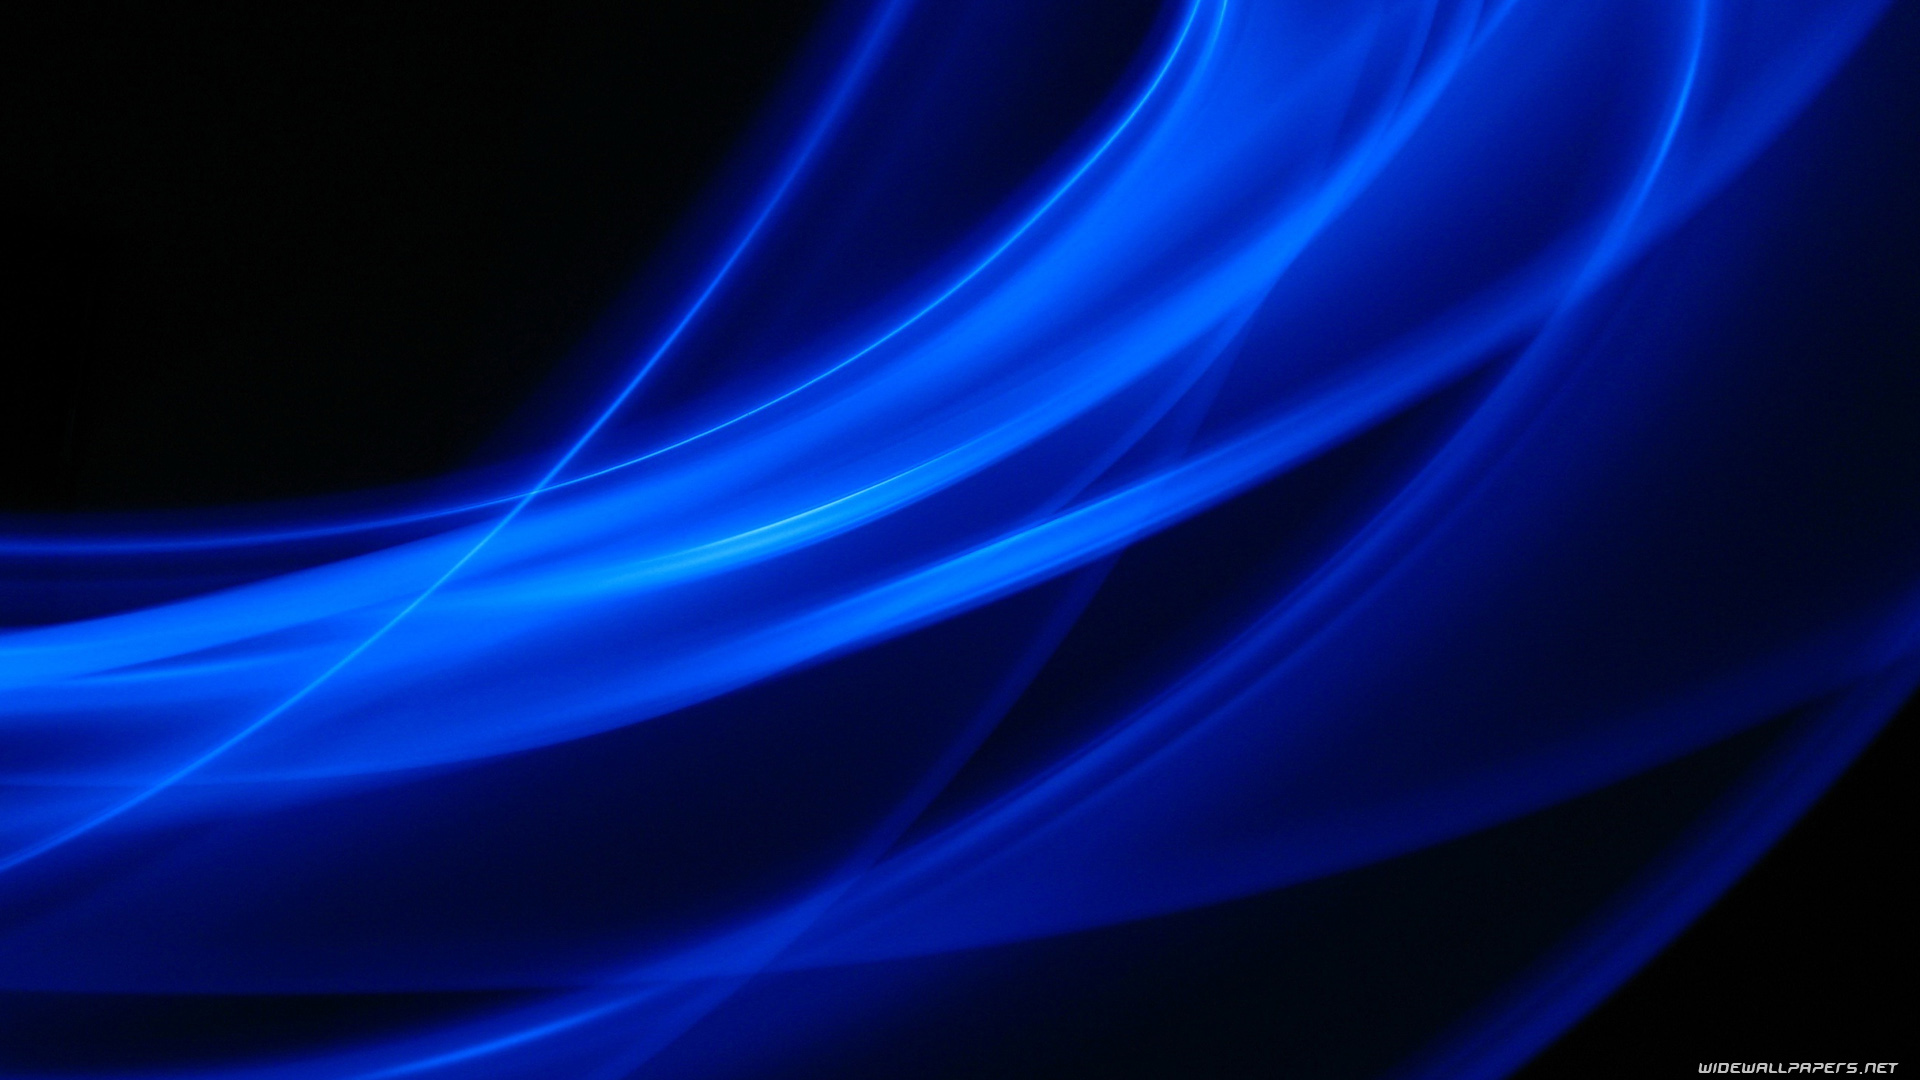 Black and Blue Abstract Widescreen HD Wallpaper 245